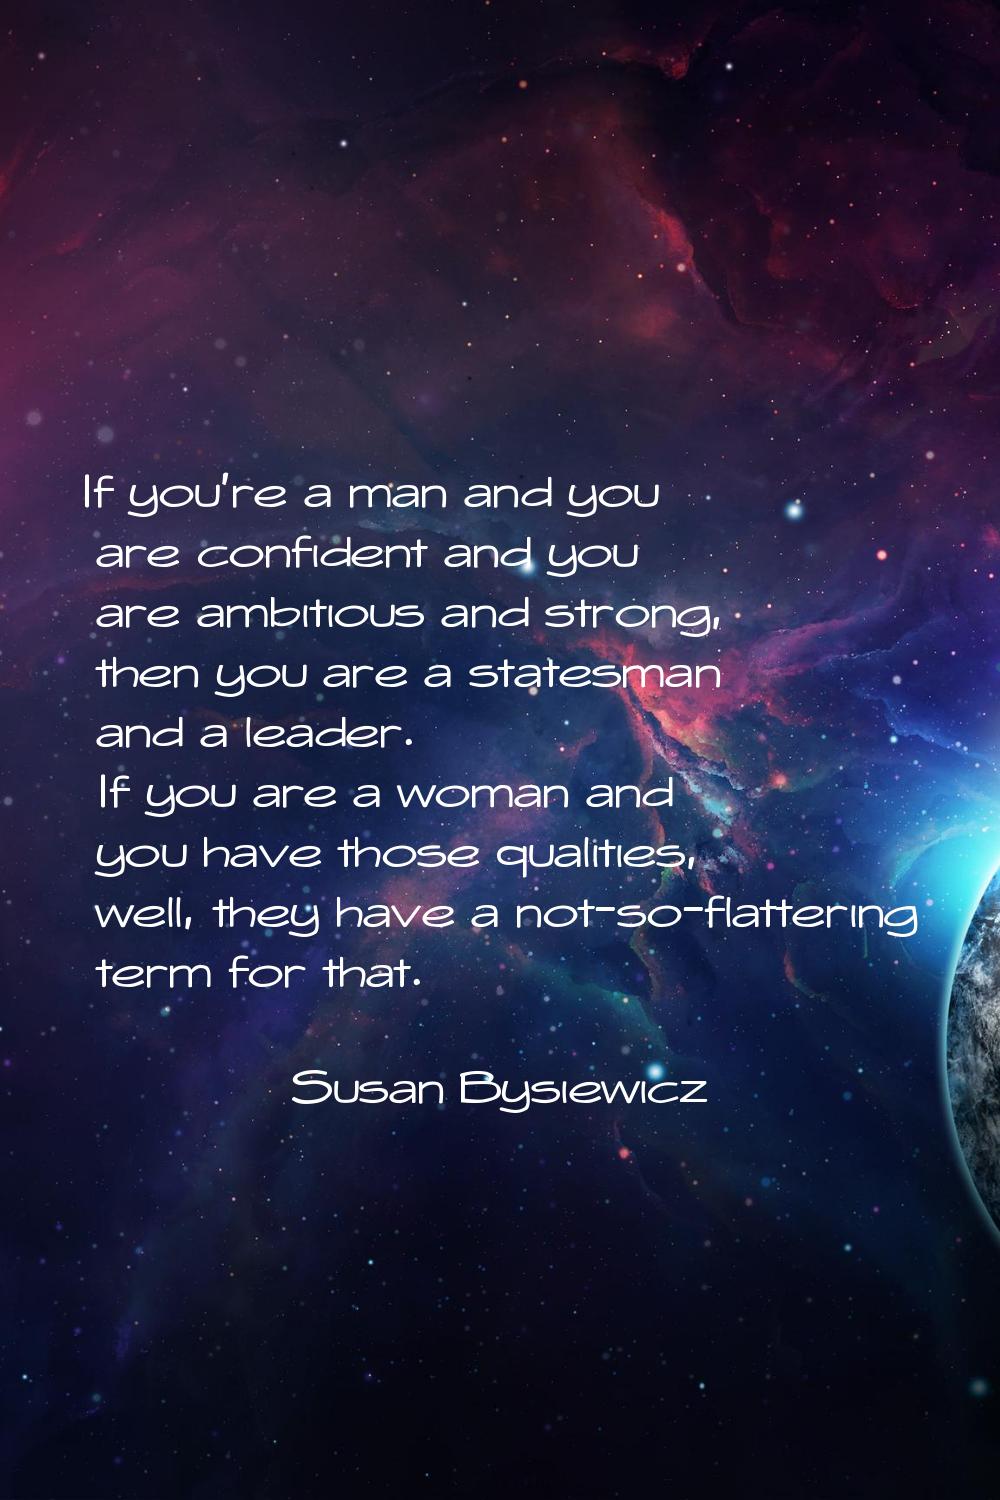 If you're a man and you are confident and you are ambitious and strong, then you are a statesman an